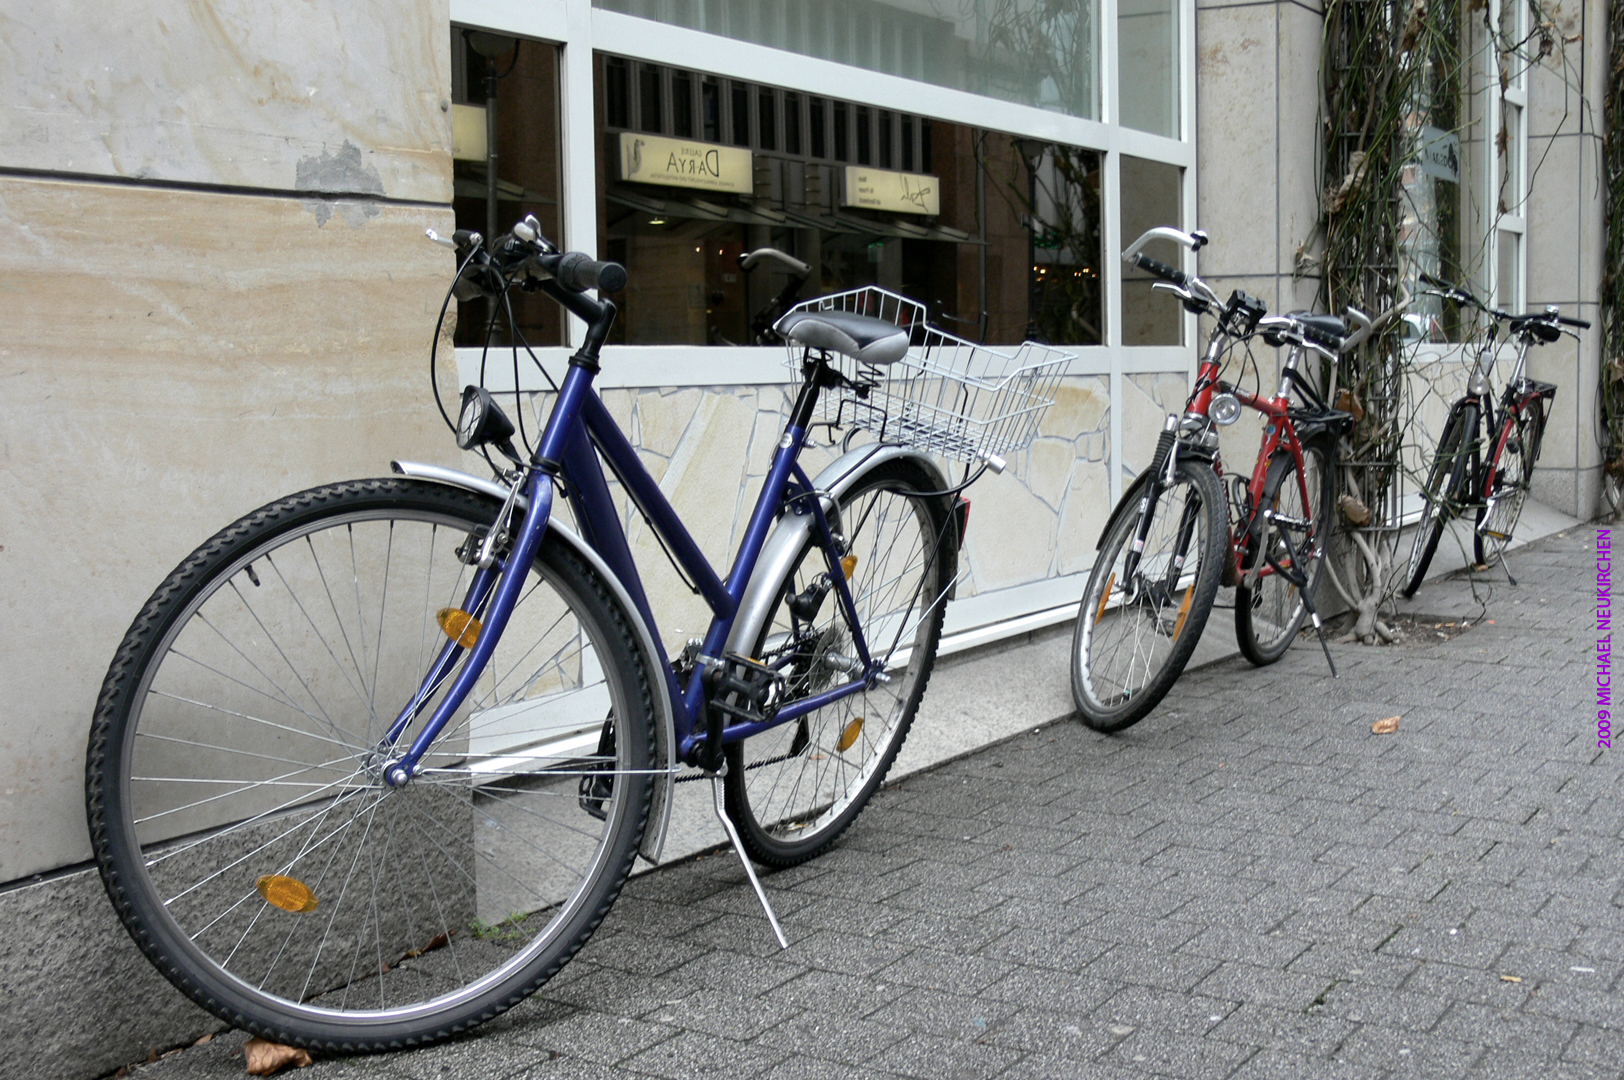 four bikes parked next to a tall building